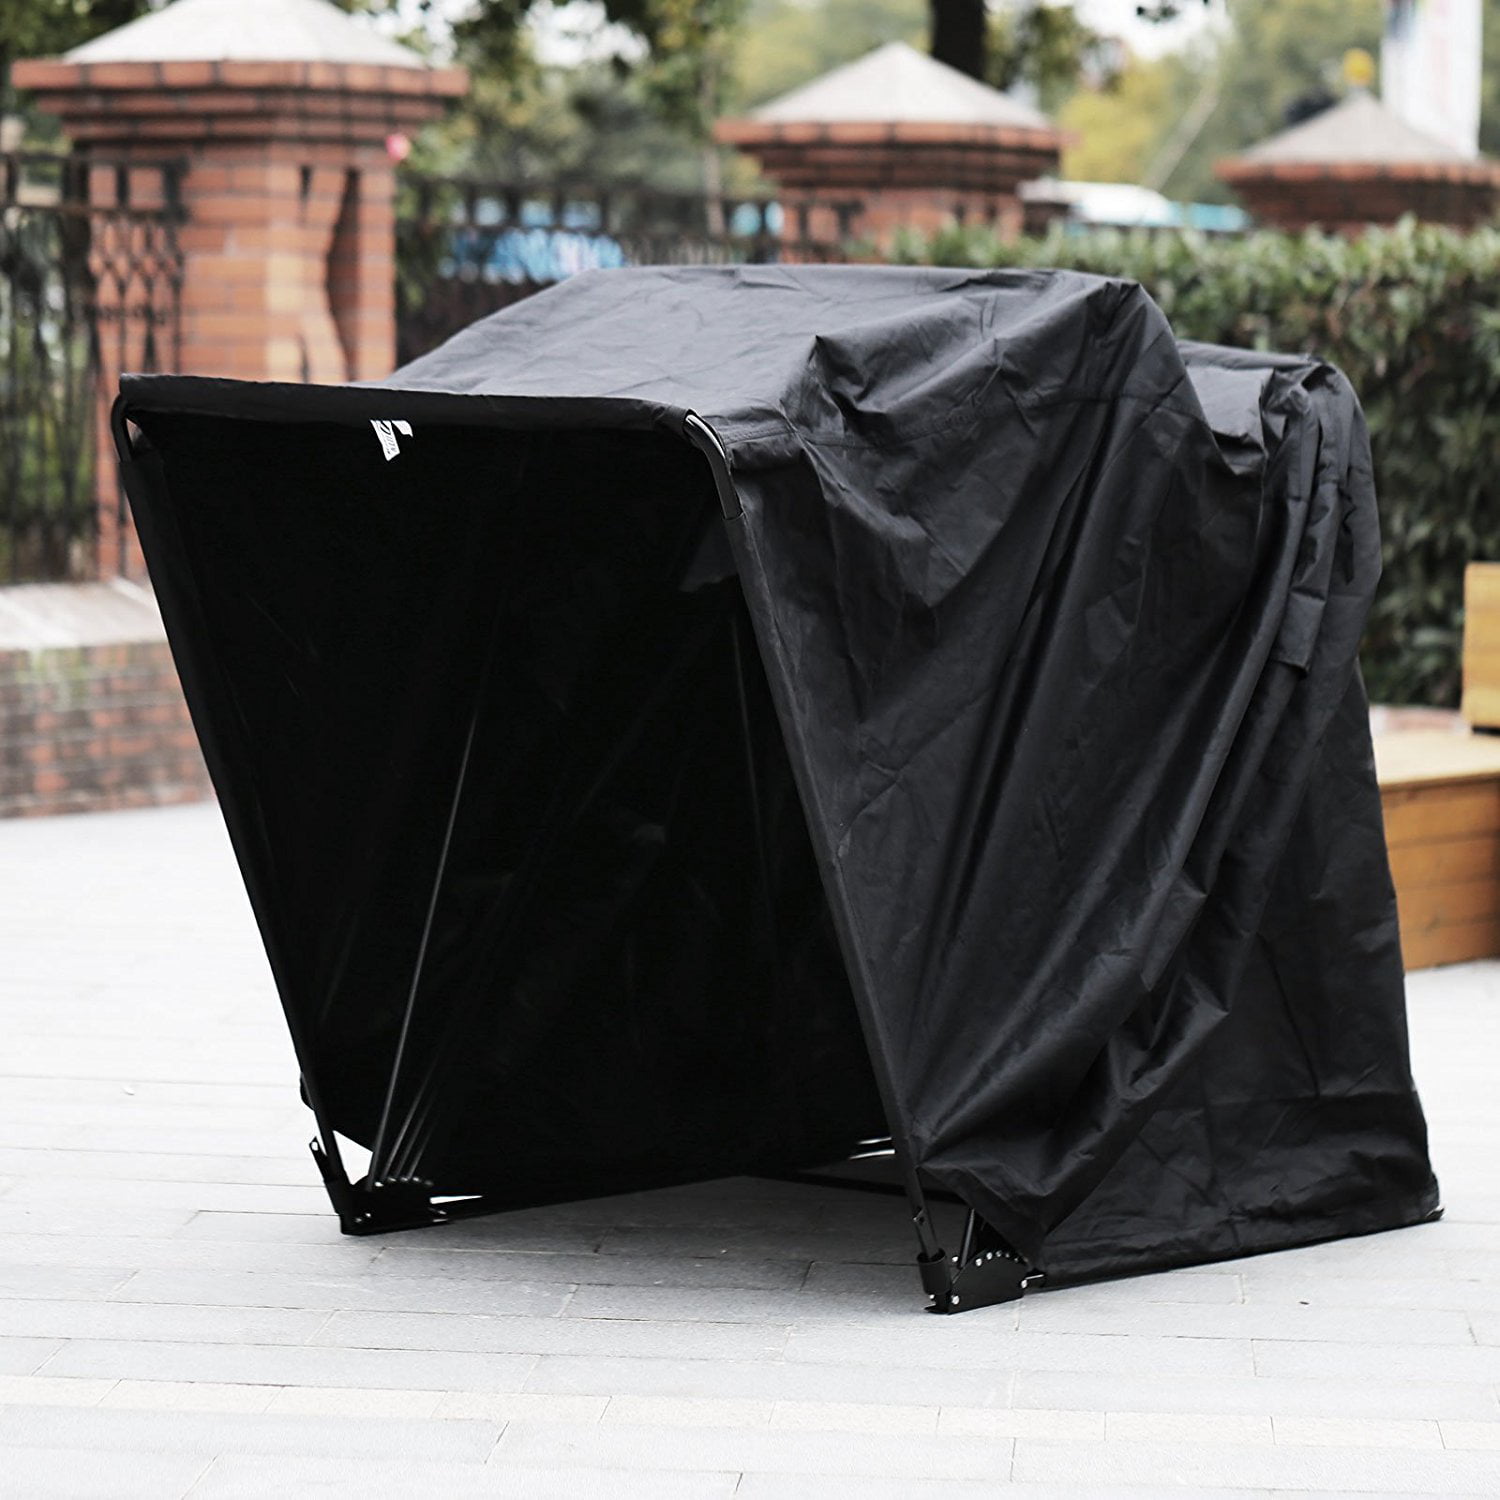 BestEquip Motorcycle Shelter Shed 